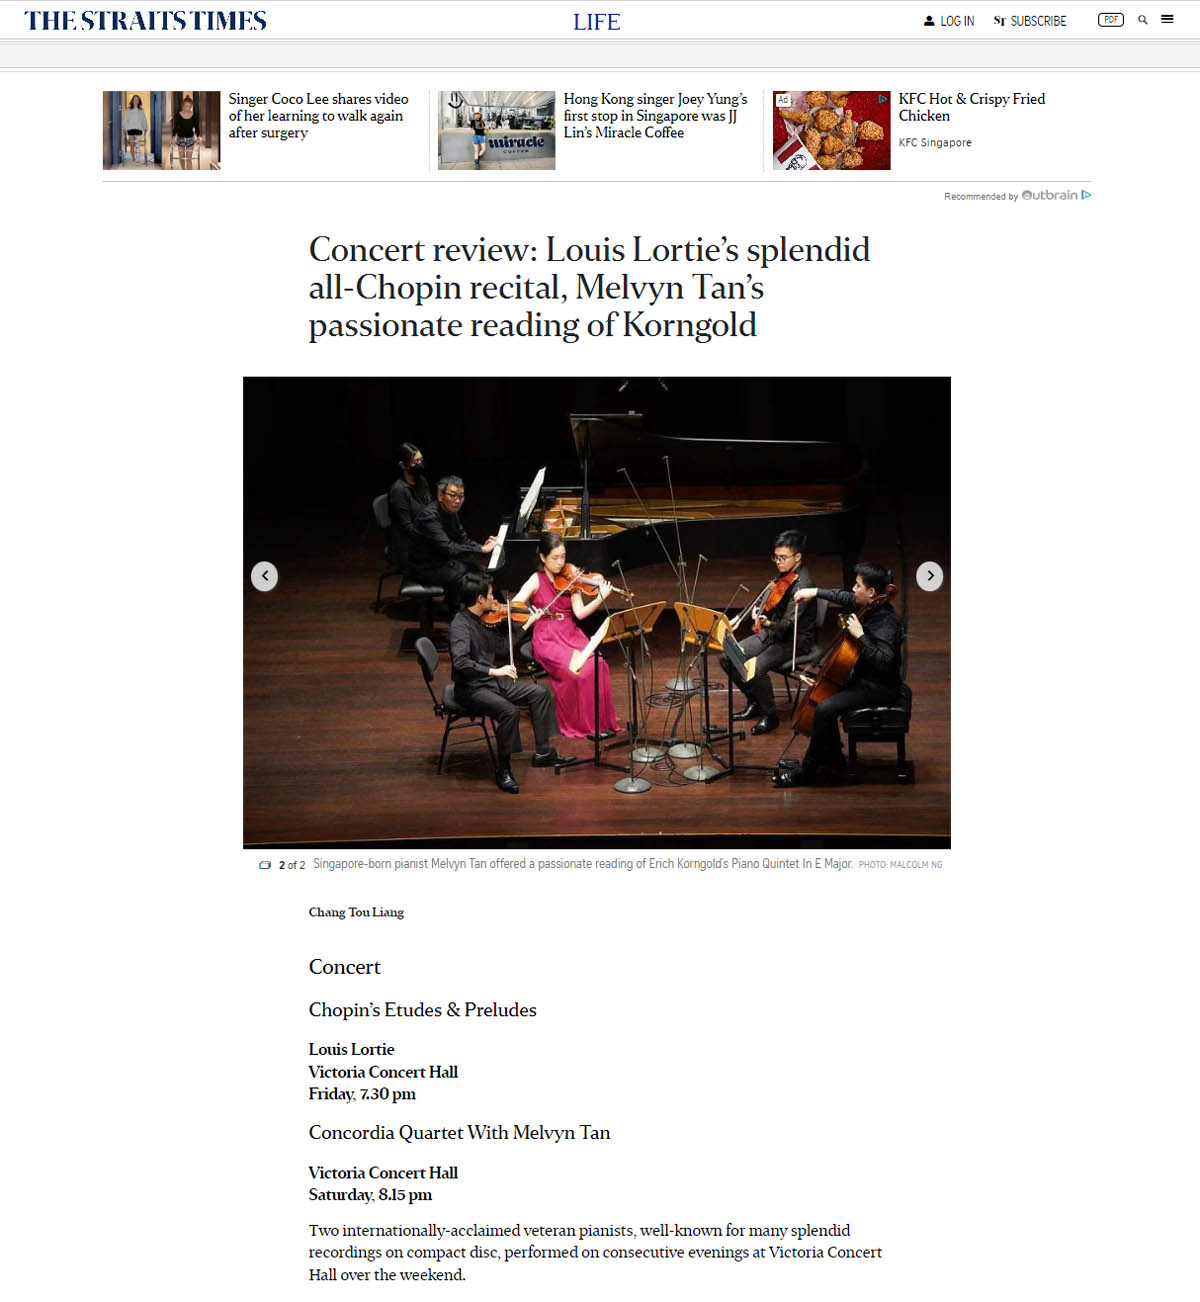 Concordia Quartet with Melvyn Tan Straits Times review